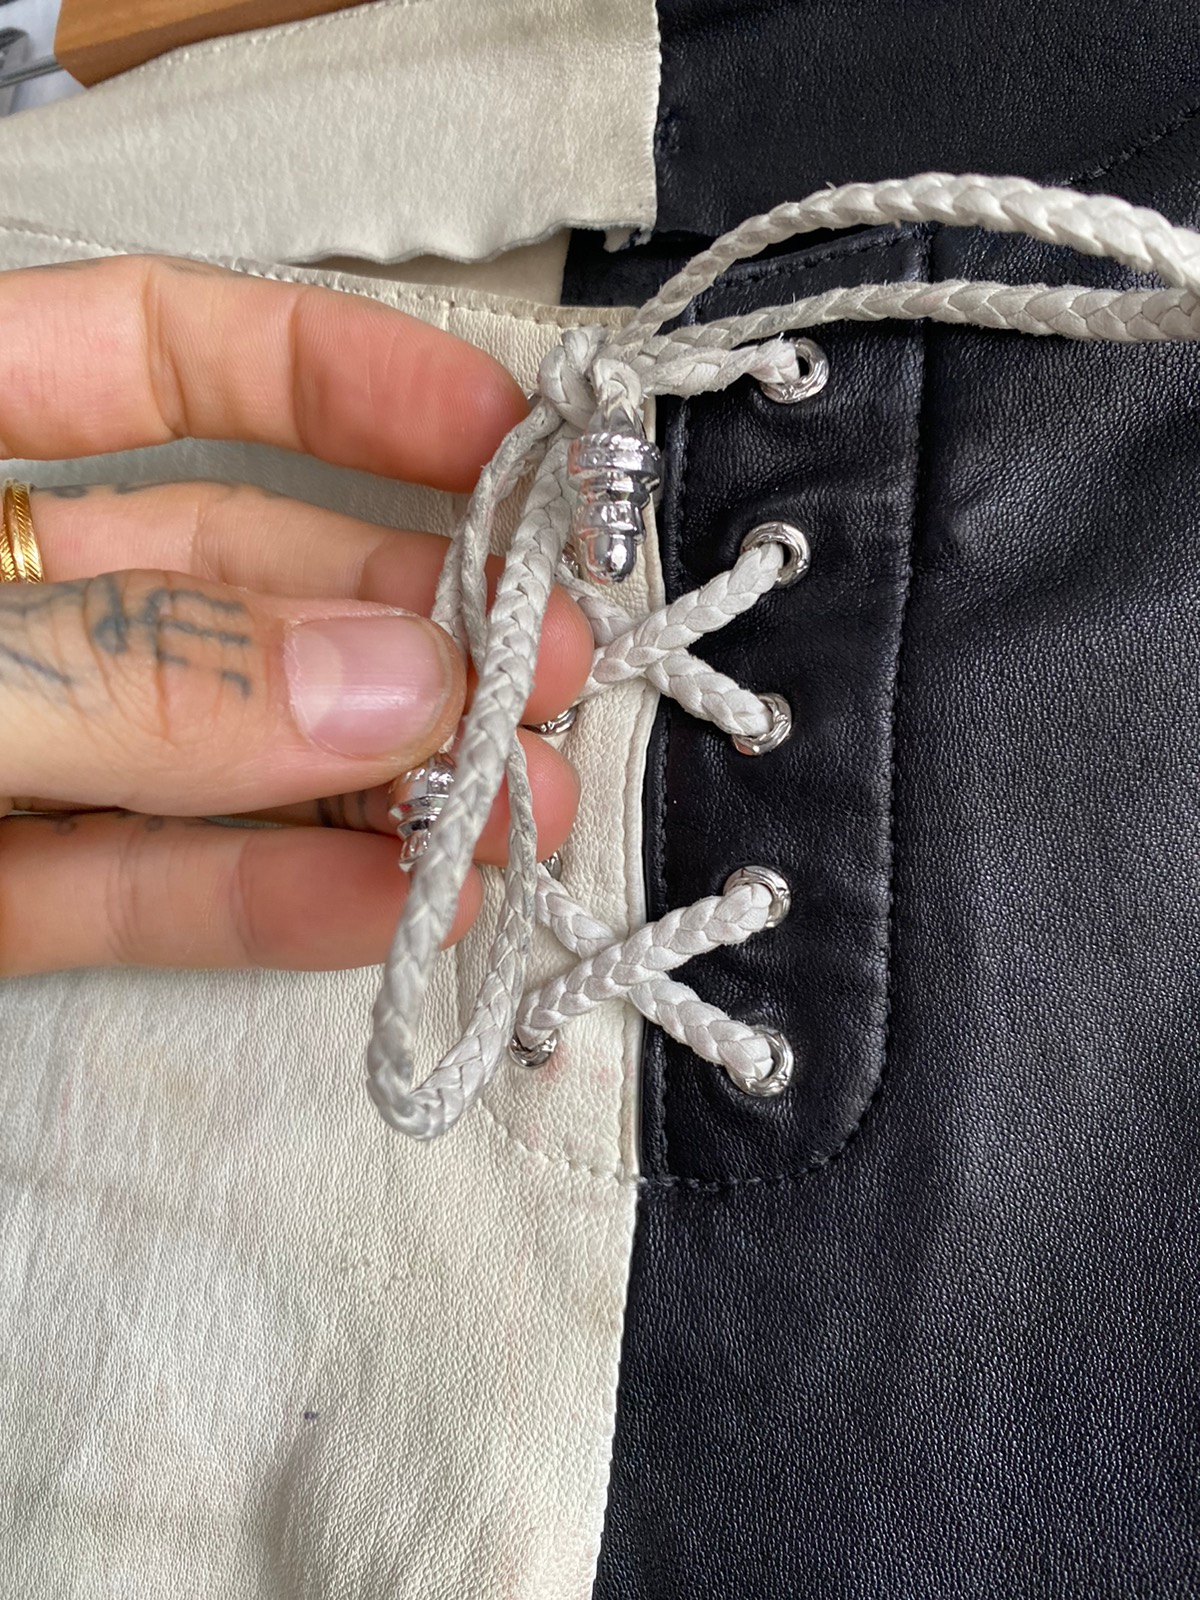 Chrome Hearts LEATHER Contrast Skinny Jeans Pants